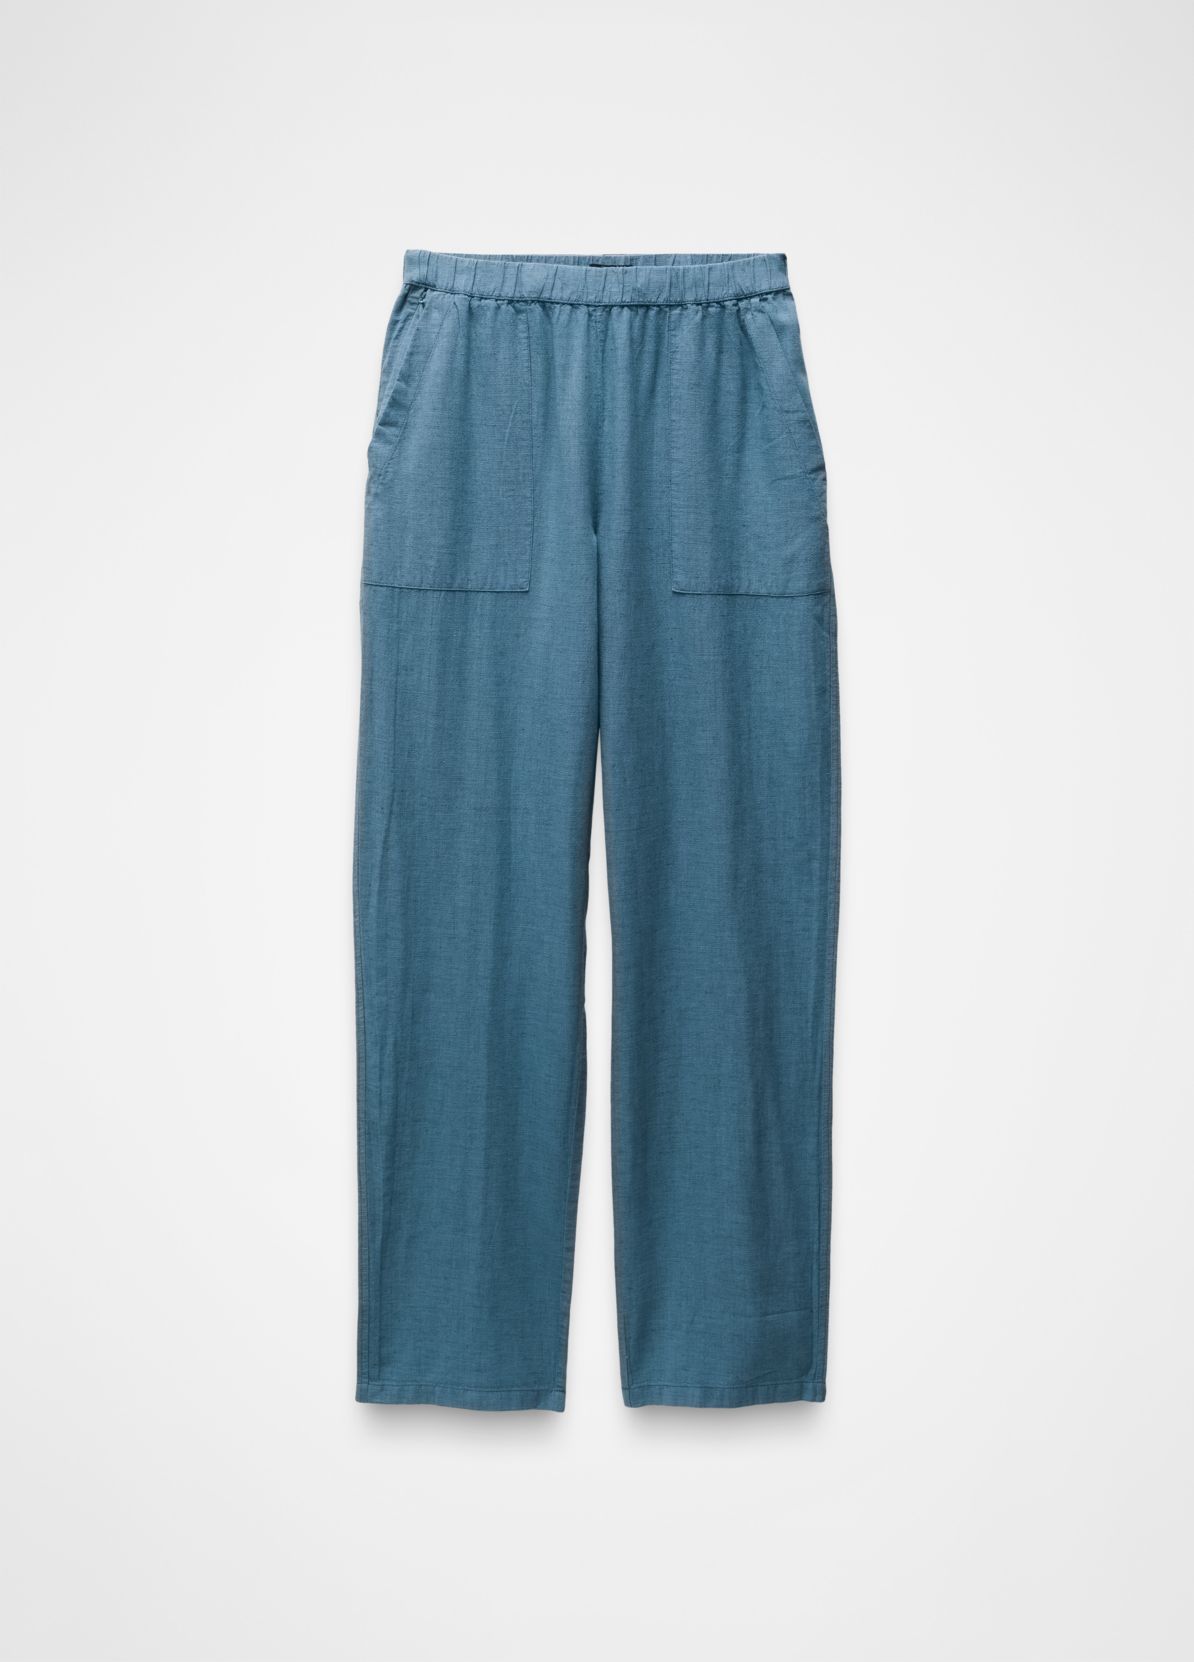 Prana - June Day Pant - all things being eco chilliwack - women's sustainable and fair trade clothing and accessories store - organic cotton & hemp fabric - high tide blue color detail